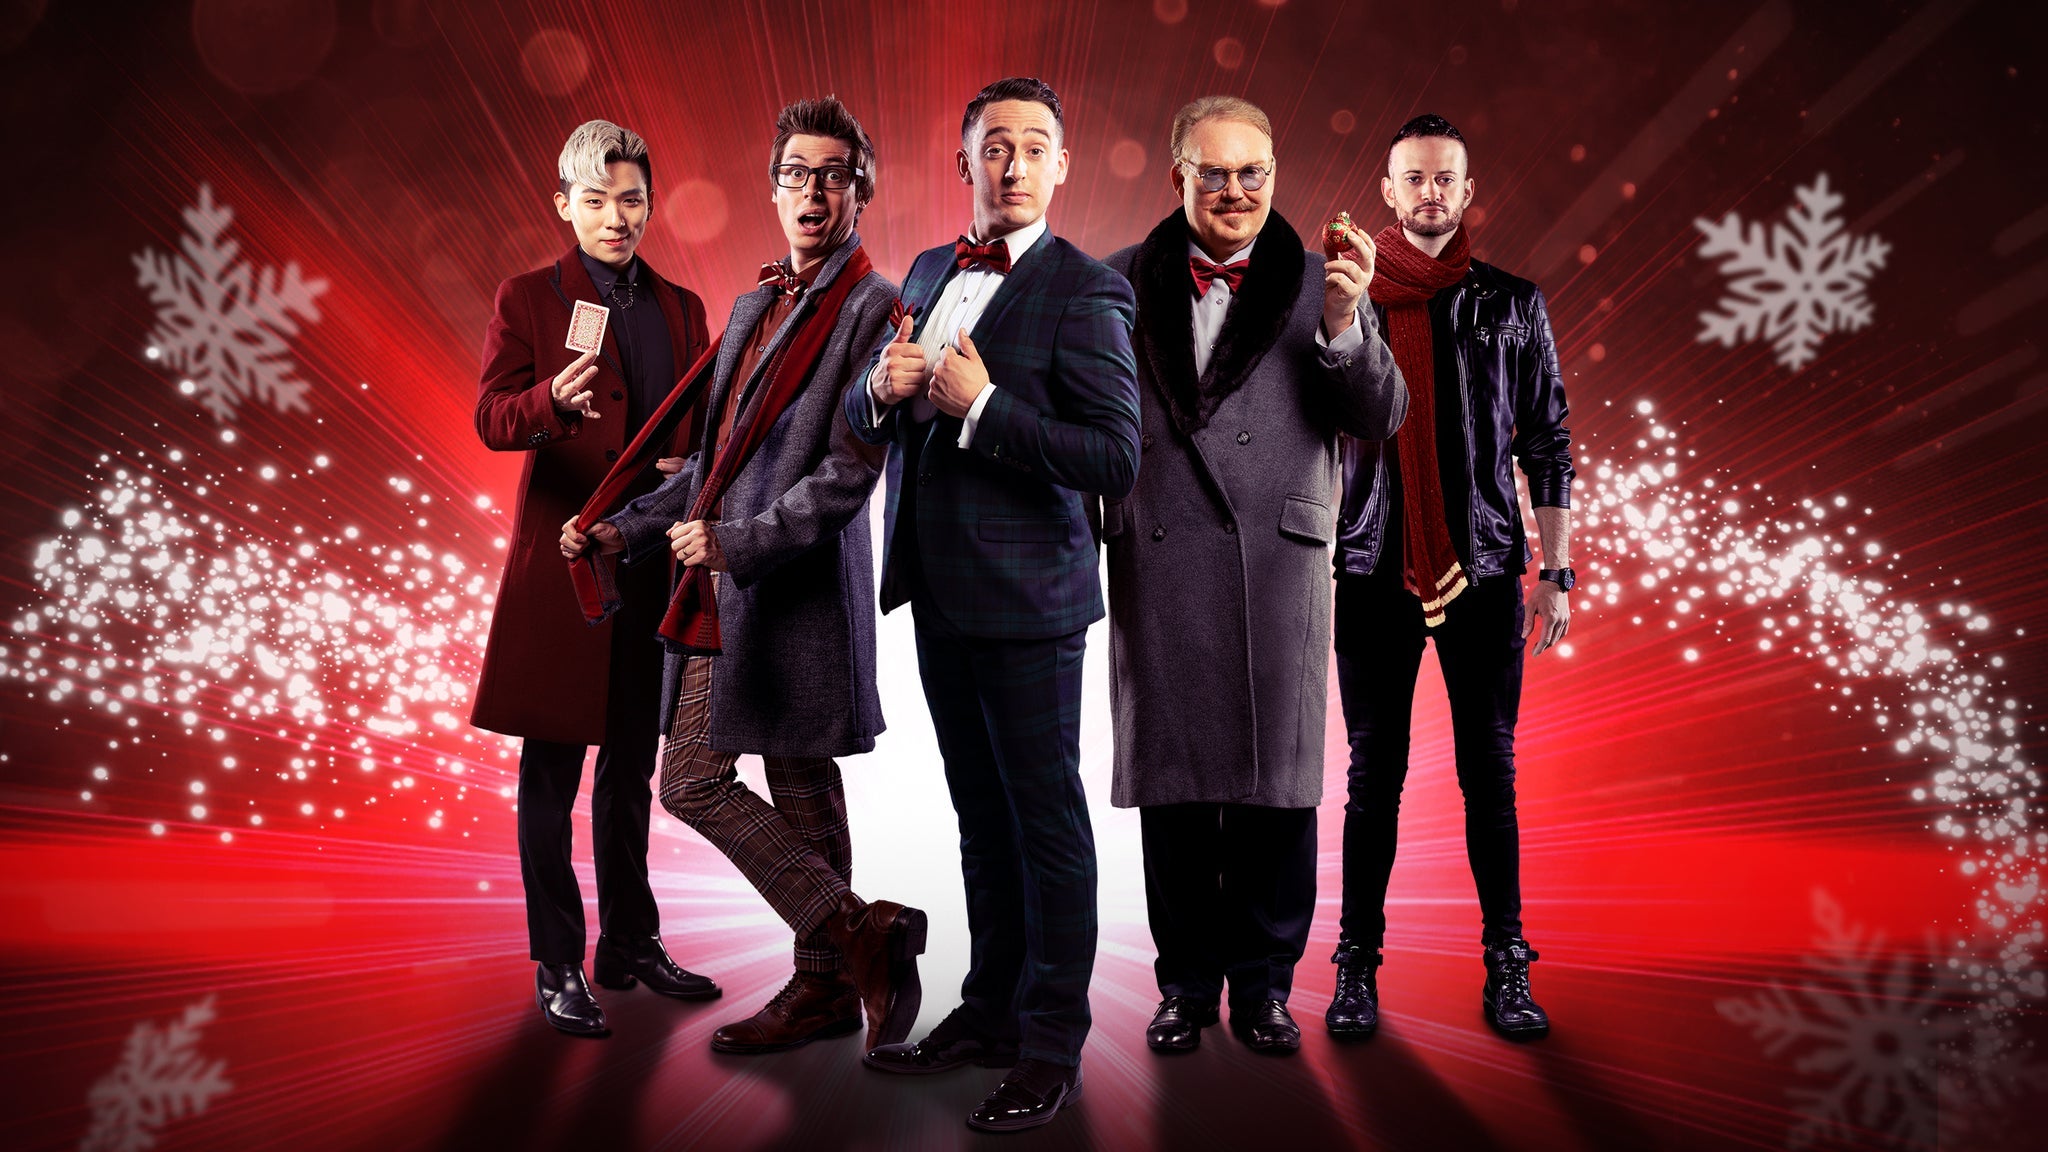 The Illusionists - Magic of the Holidays (Touring)